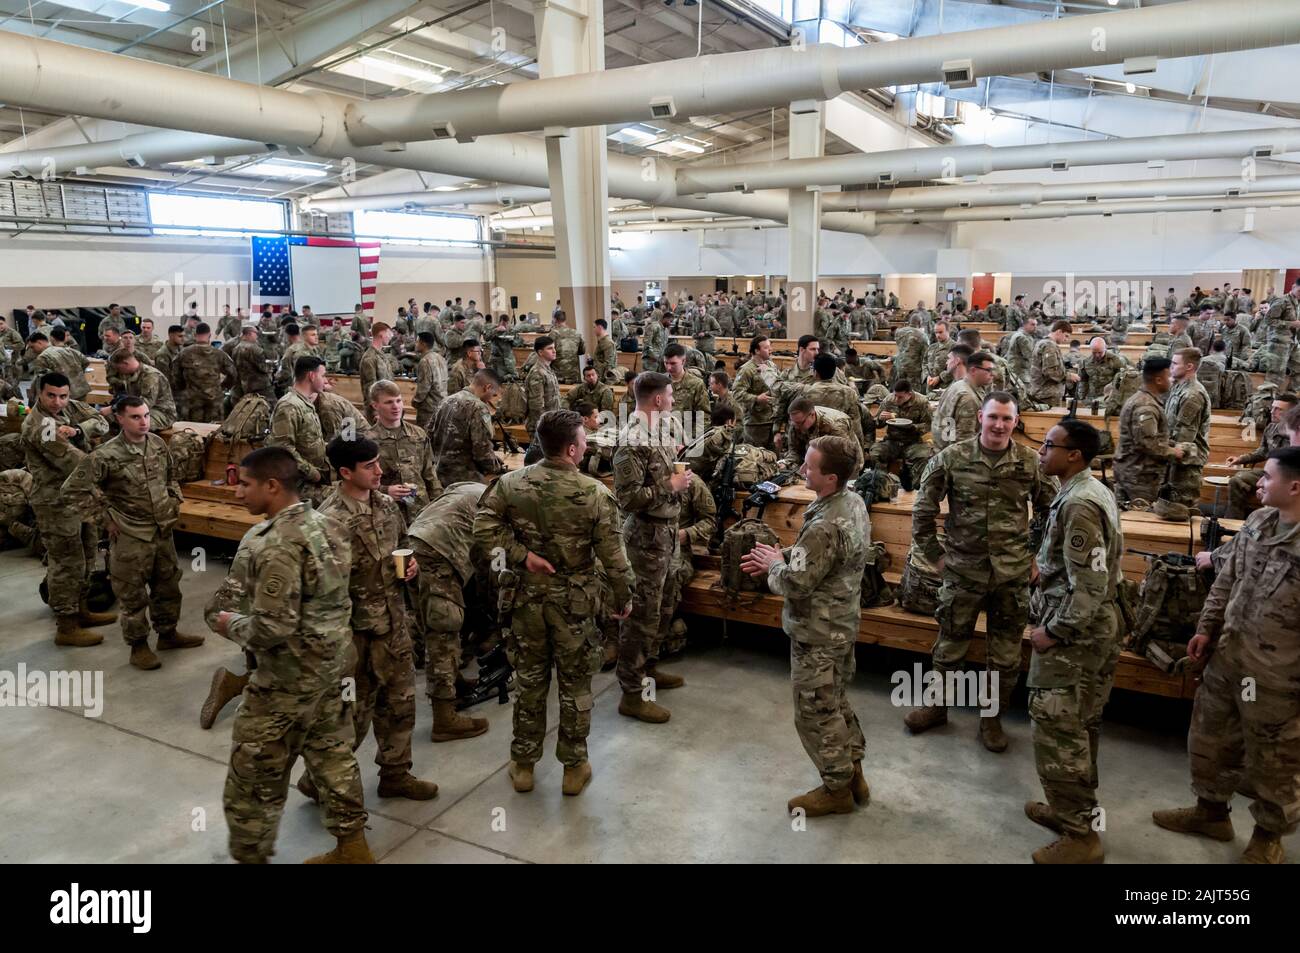 Pope Army Airfield, NC, USA. 5th Jan, 2020. Jan. 5, 2020 - POPE ARMY AIRFIELD, N.C., USA - U.S. Army paratroopers from the 1st Brigade Combat Team, 82nd Airborne Division, continue their deployment from Pope Army Airfield, North Carolina. The 'All American Division'' Immediate Response Force (IRF), based at Fort Bragg, N.C., mobilized for deployment to the U.S. Central Command area of operations in response to increased threat levels against U.S. personnel and facilities in the area. Today's deployment follows the Jan. 1 deployment of a division infantry battalion; the Jan. 2 U.S. drone Stock Photo